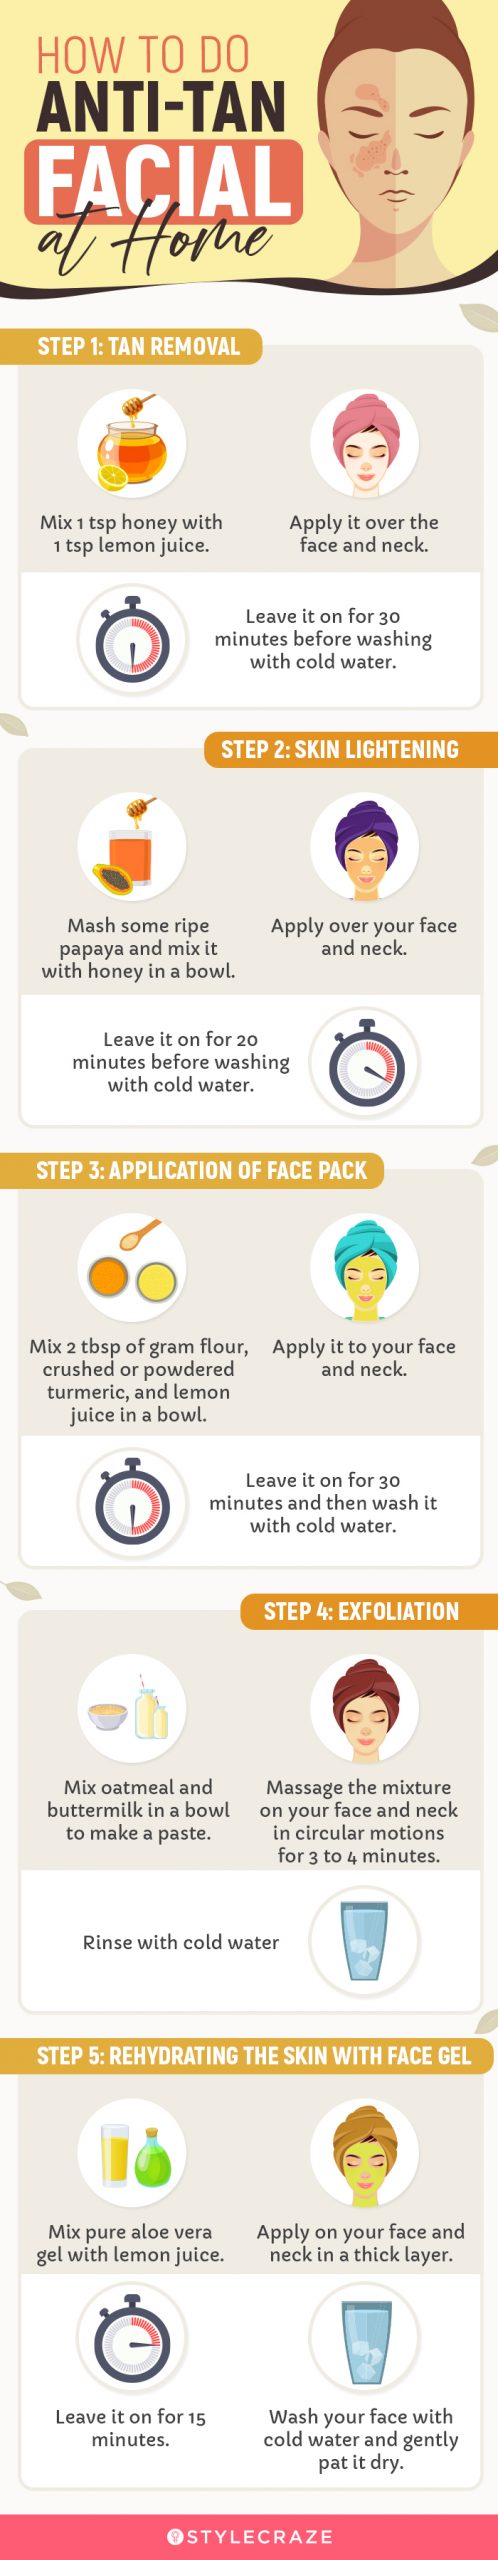 how to do anti-tan facial at home [infographic]